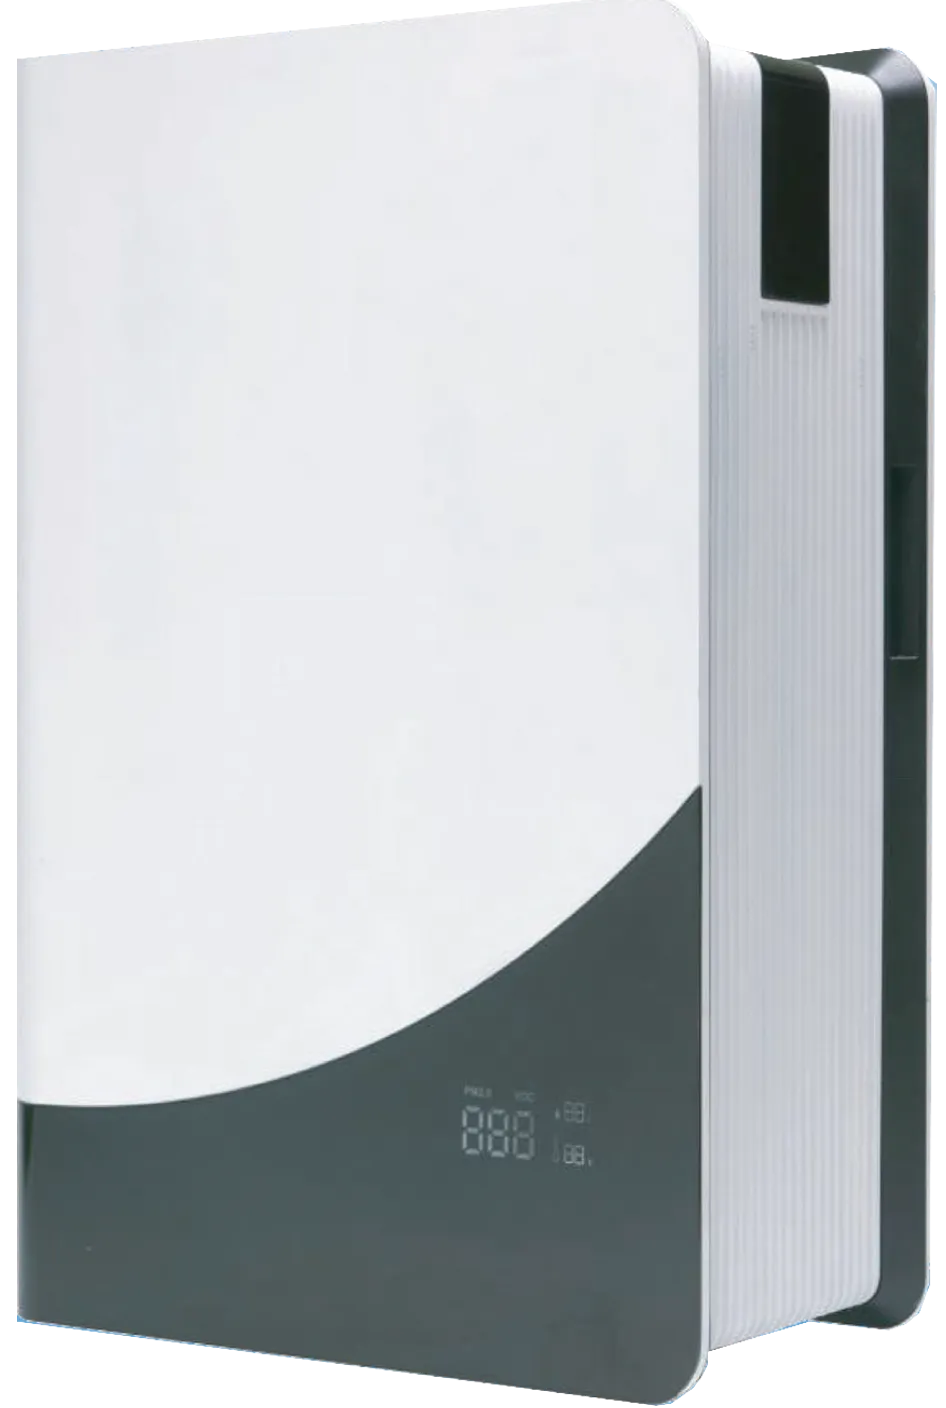 Shiva NRP5 Commercial HEPA Air Purifier